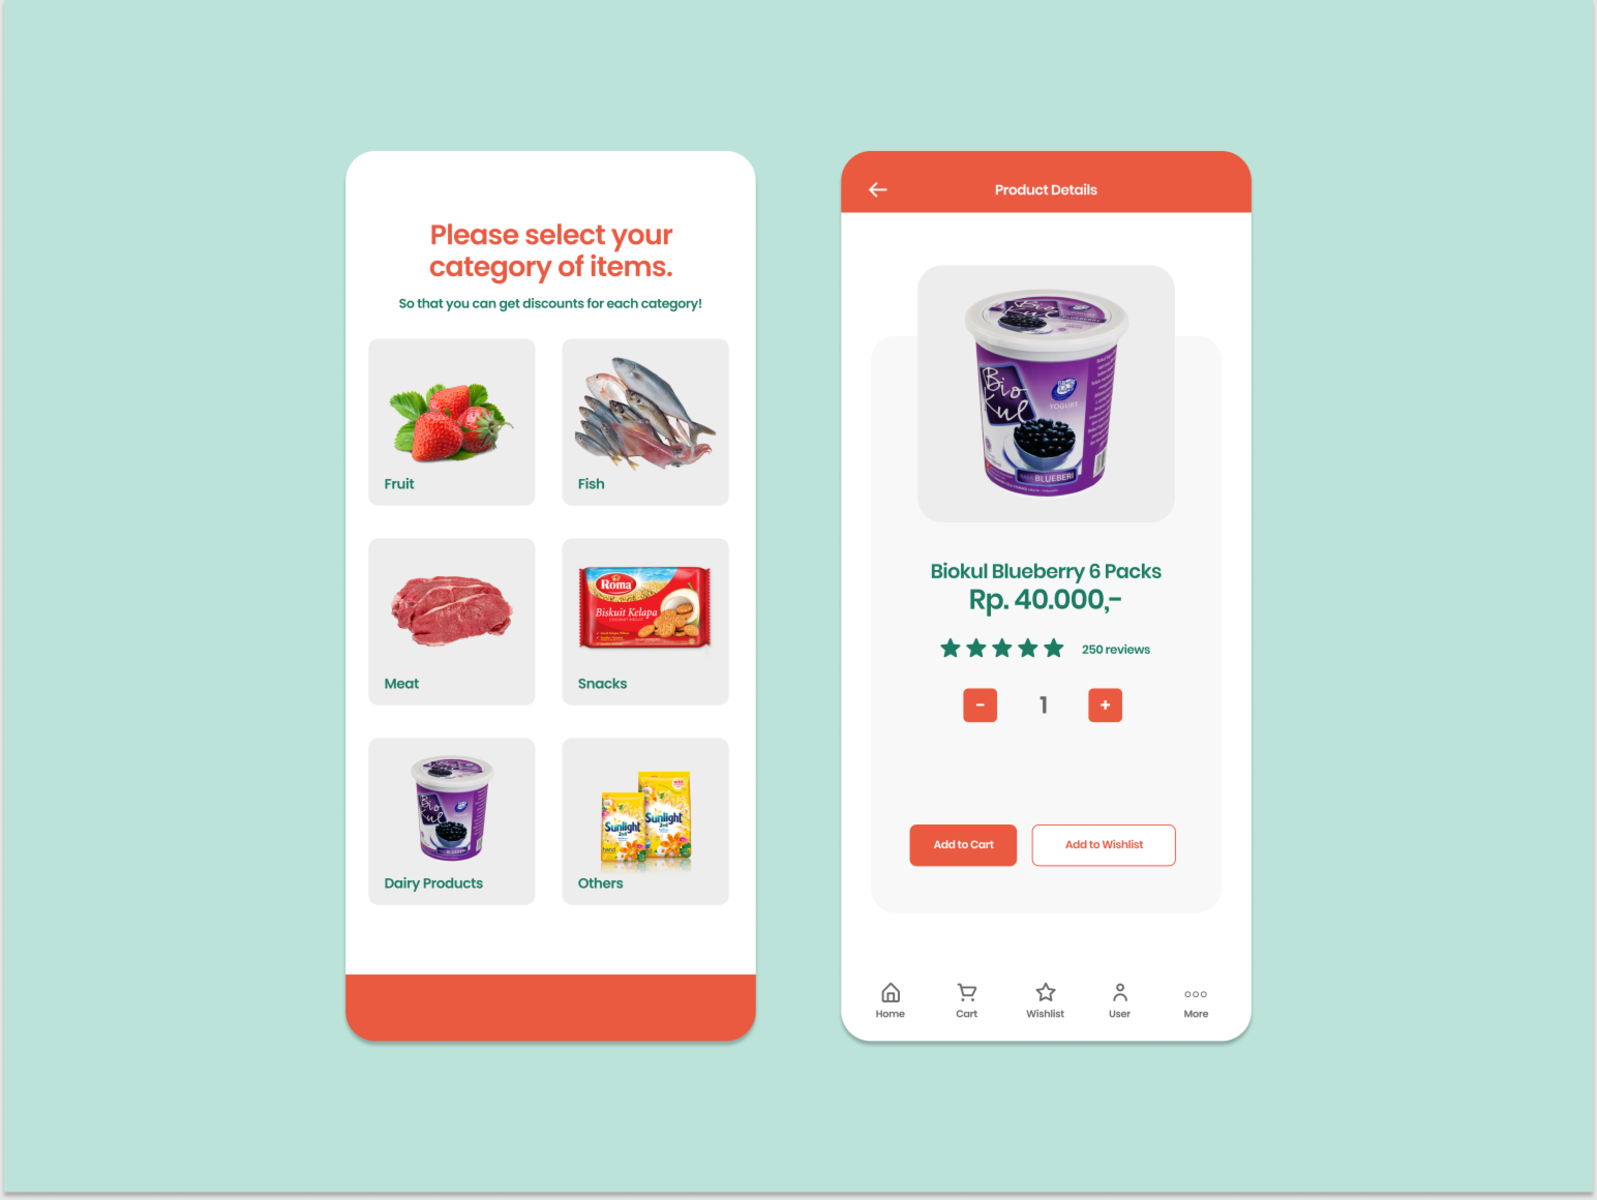 Farmers Market Indonesia UI Design by King To Anson Wong on Dribbble